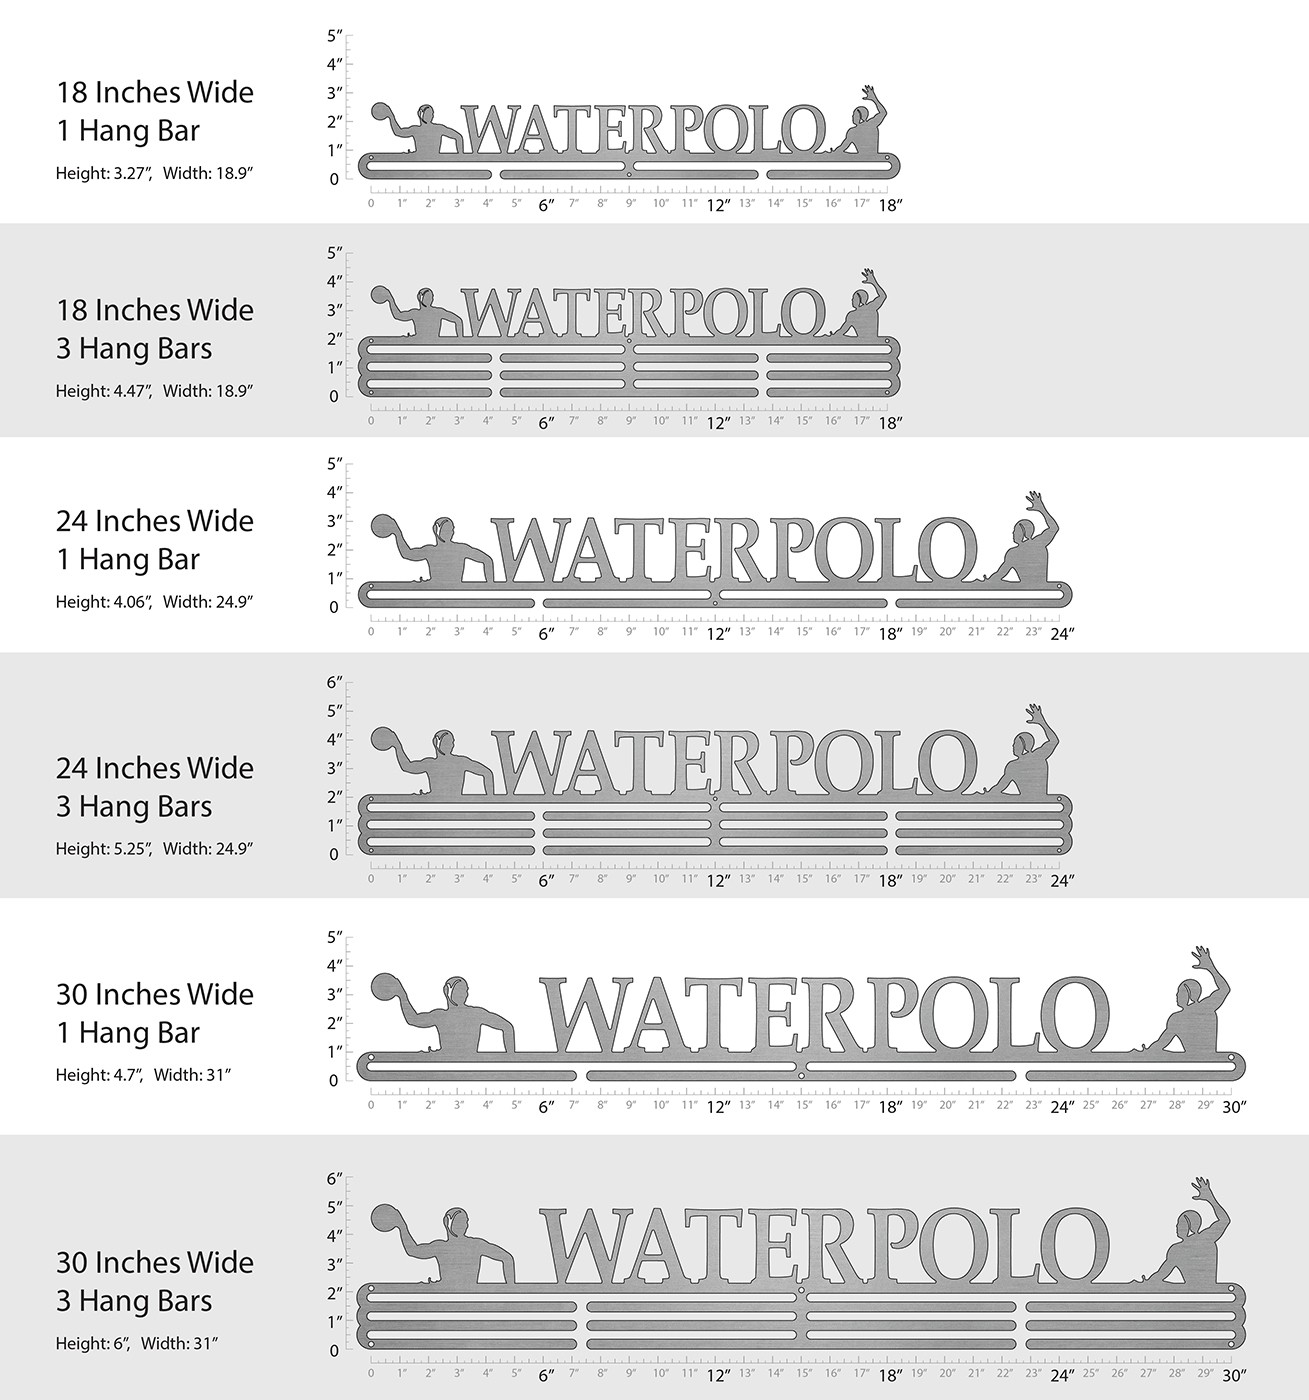 Waterpolo - Male